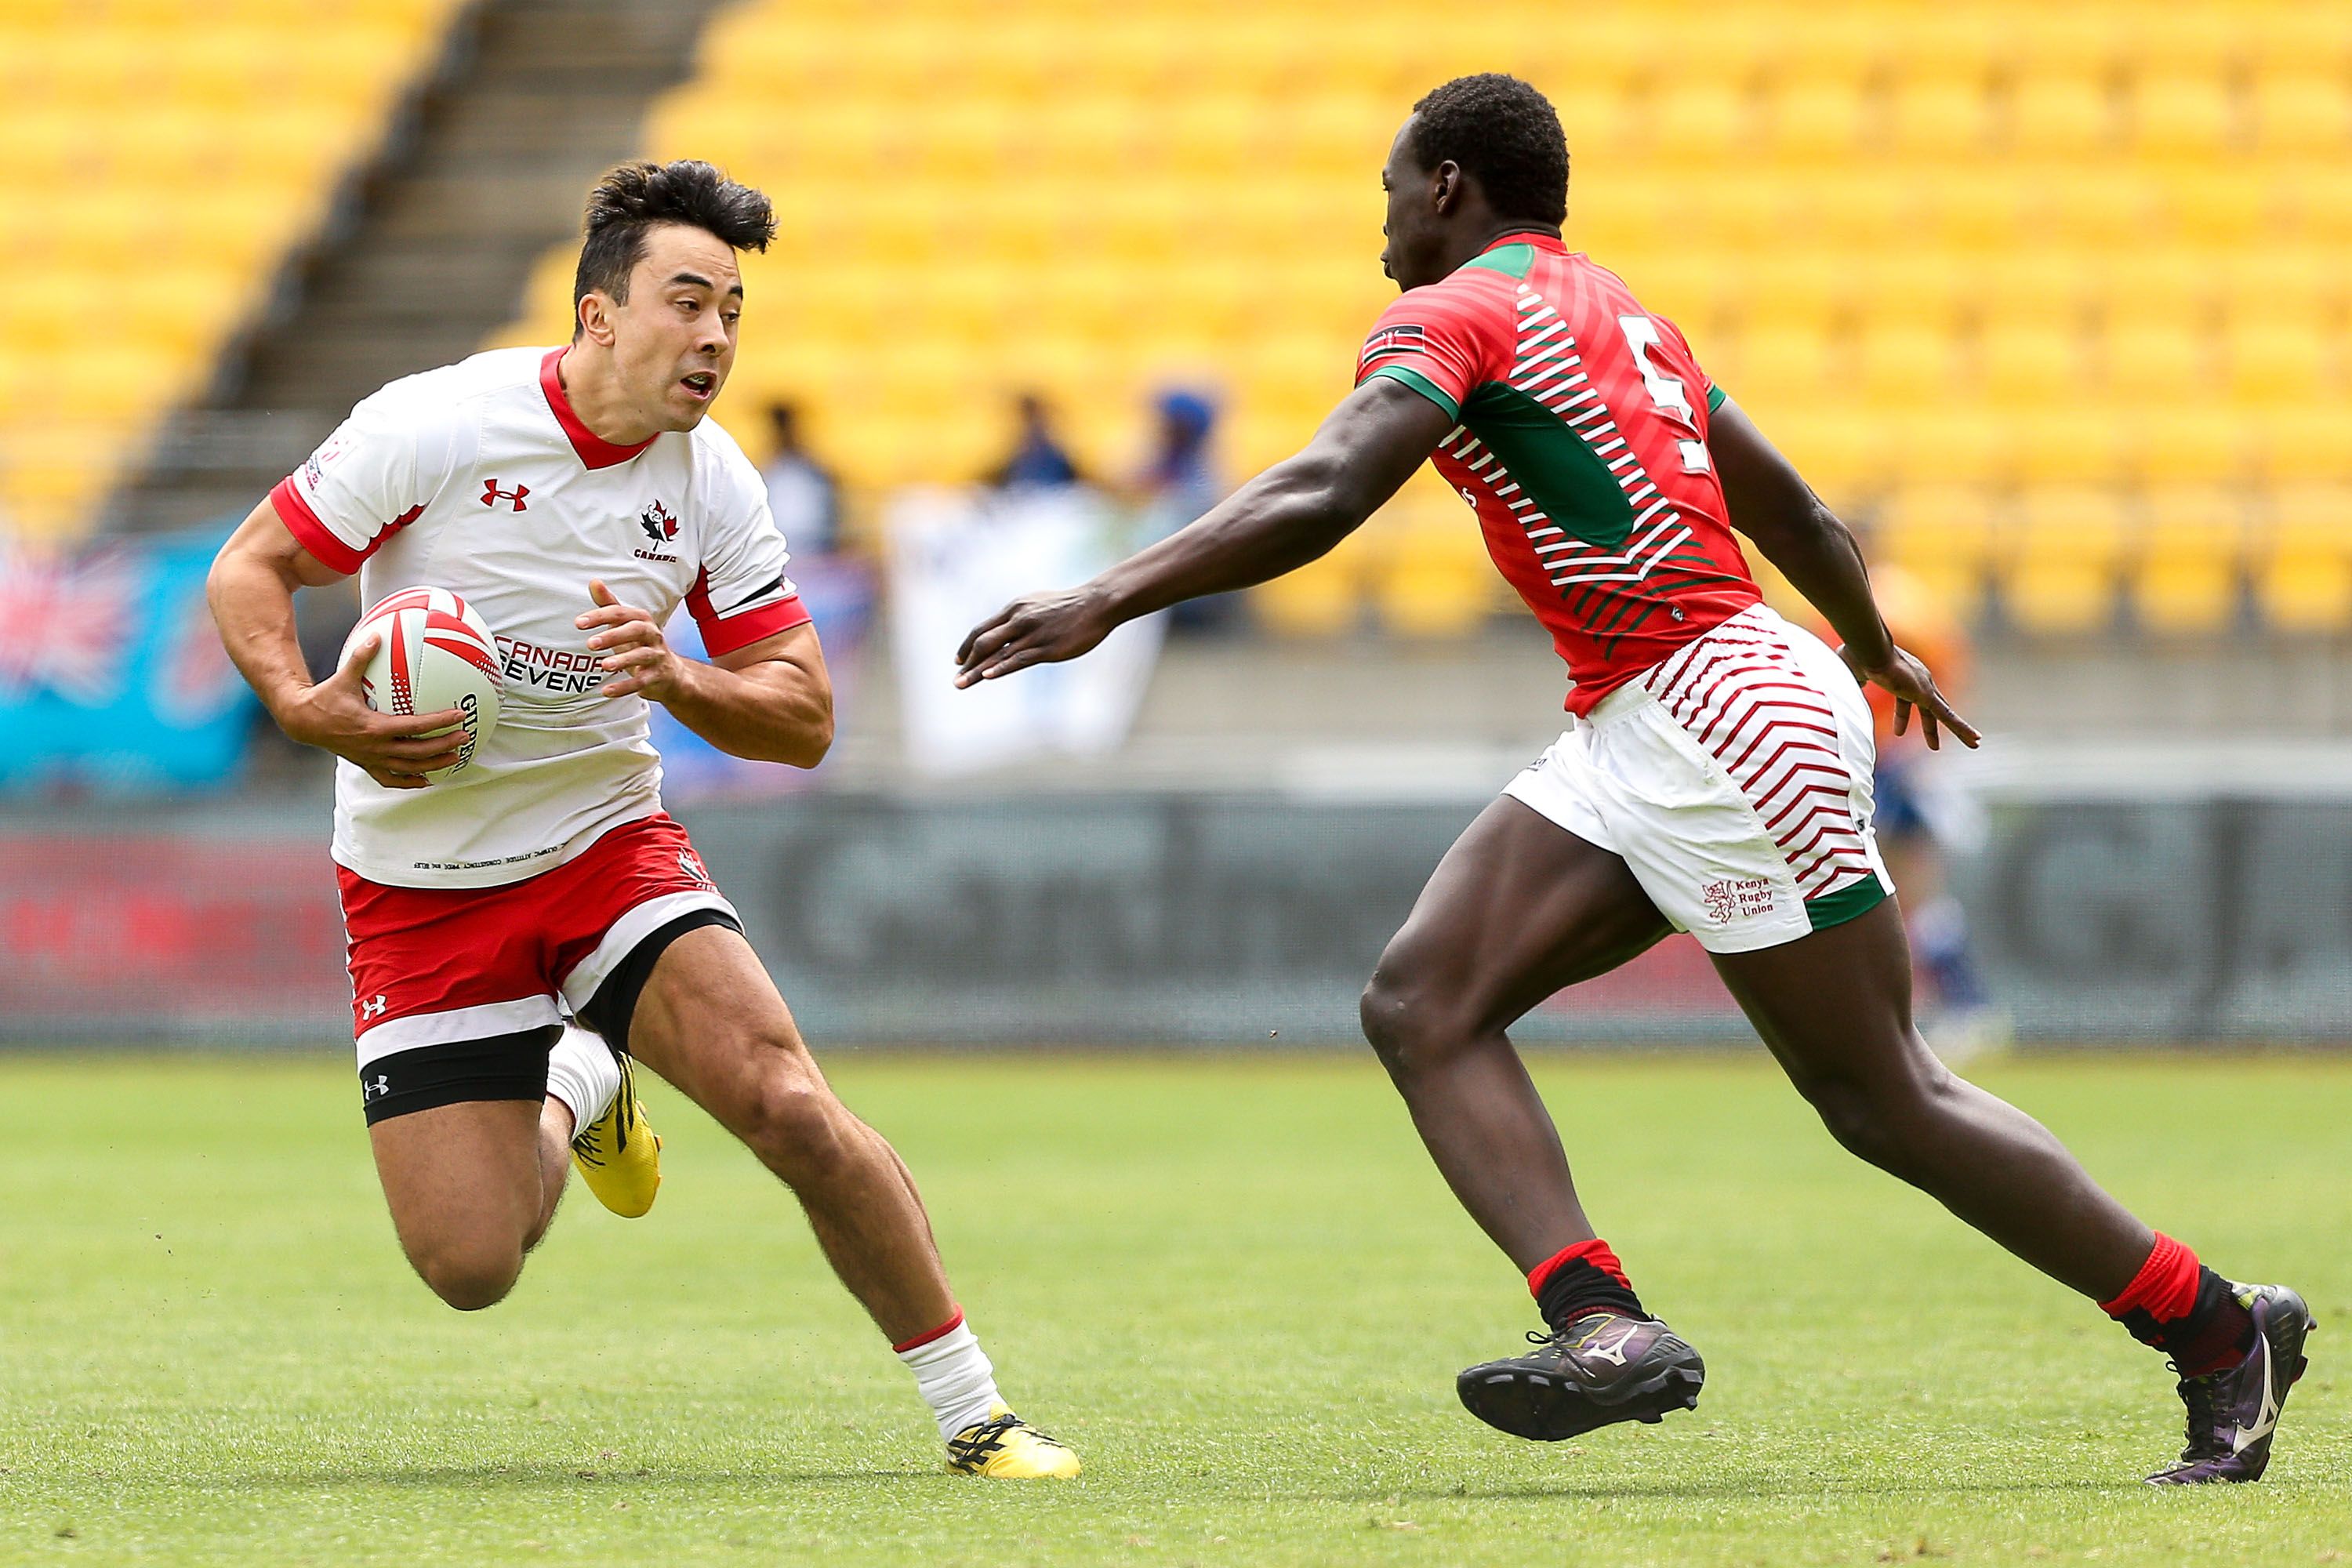 WELLINGTON, NEW ZEALAND - JANUARY 30:  Nathan Hirayama of Canada is challenged by Billy Odhiambo of Kenya during the 2016 Wellington Sevens pool match between Kenya and Canada at Westpac Stadium on January 30, 2016 in Wellington, New Zealand.  (Photo by Hagen Hopkins/Getty Images)